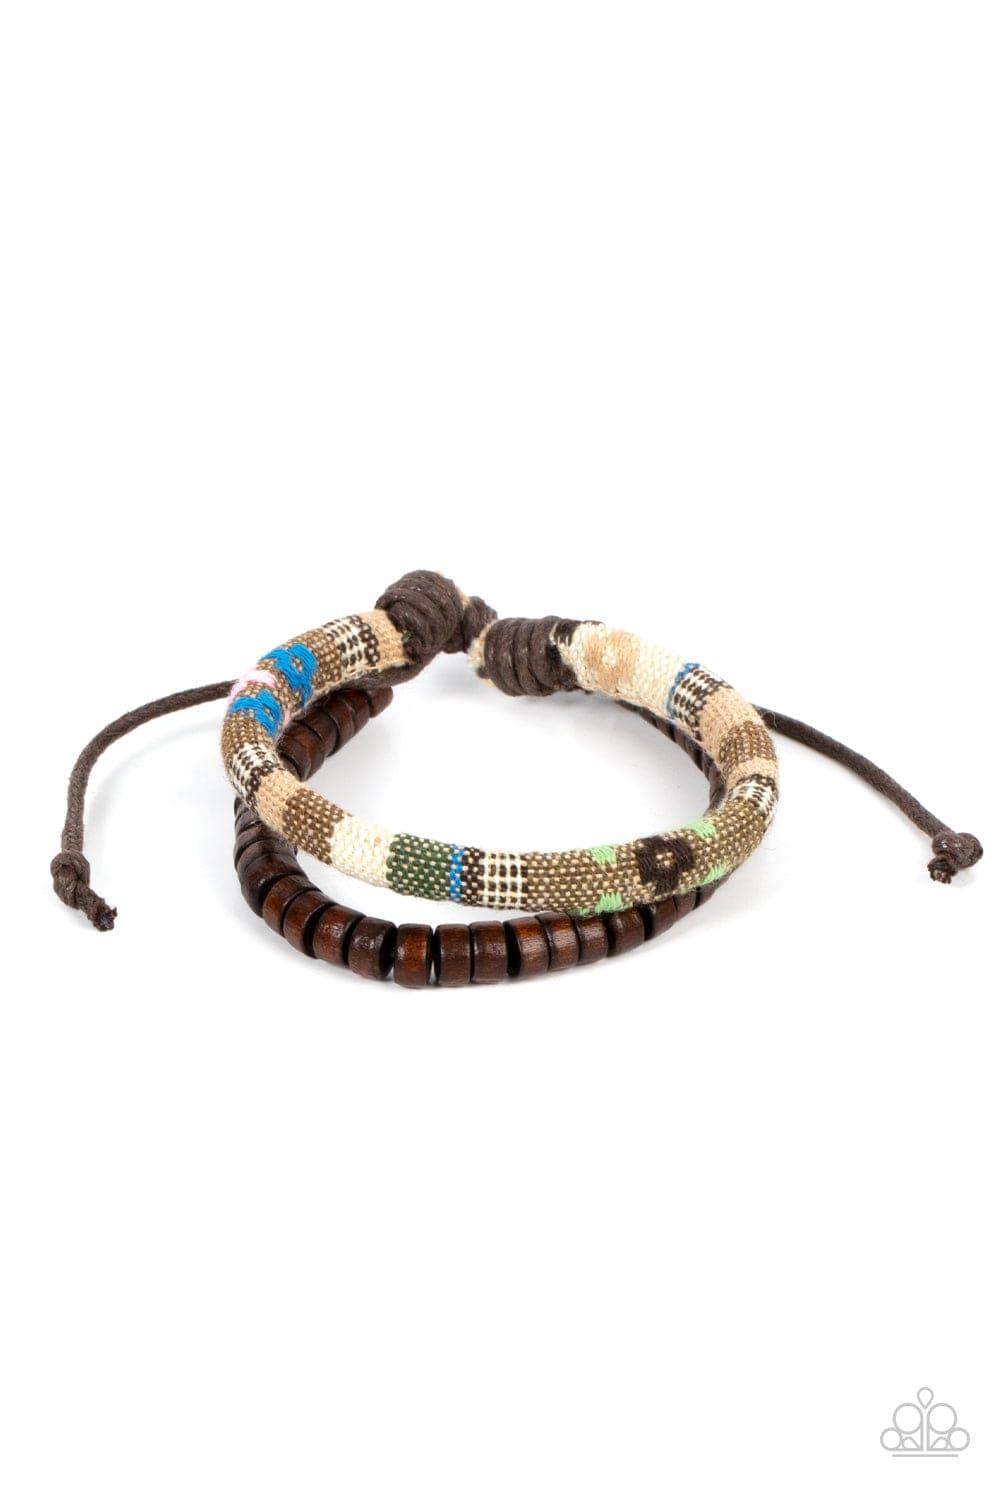 Paparazzi Accessories - Pack Your Poncho - Brown Urban Bracelet - Bling by JessieK